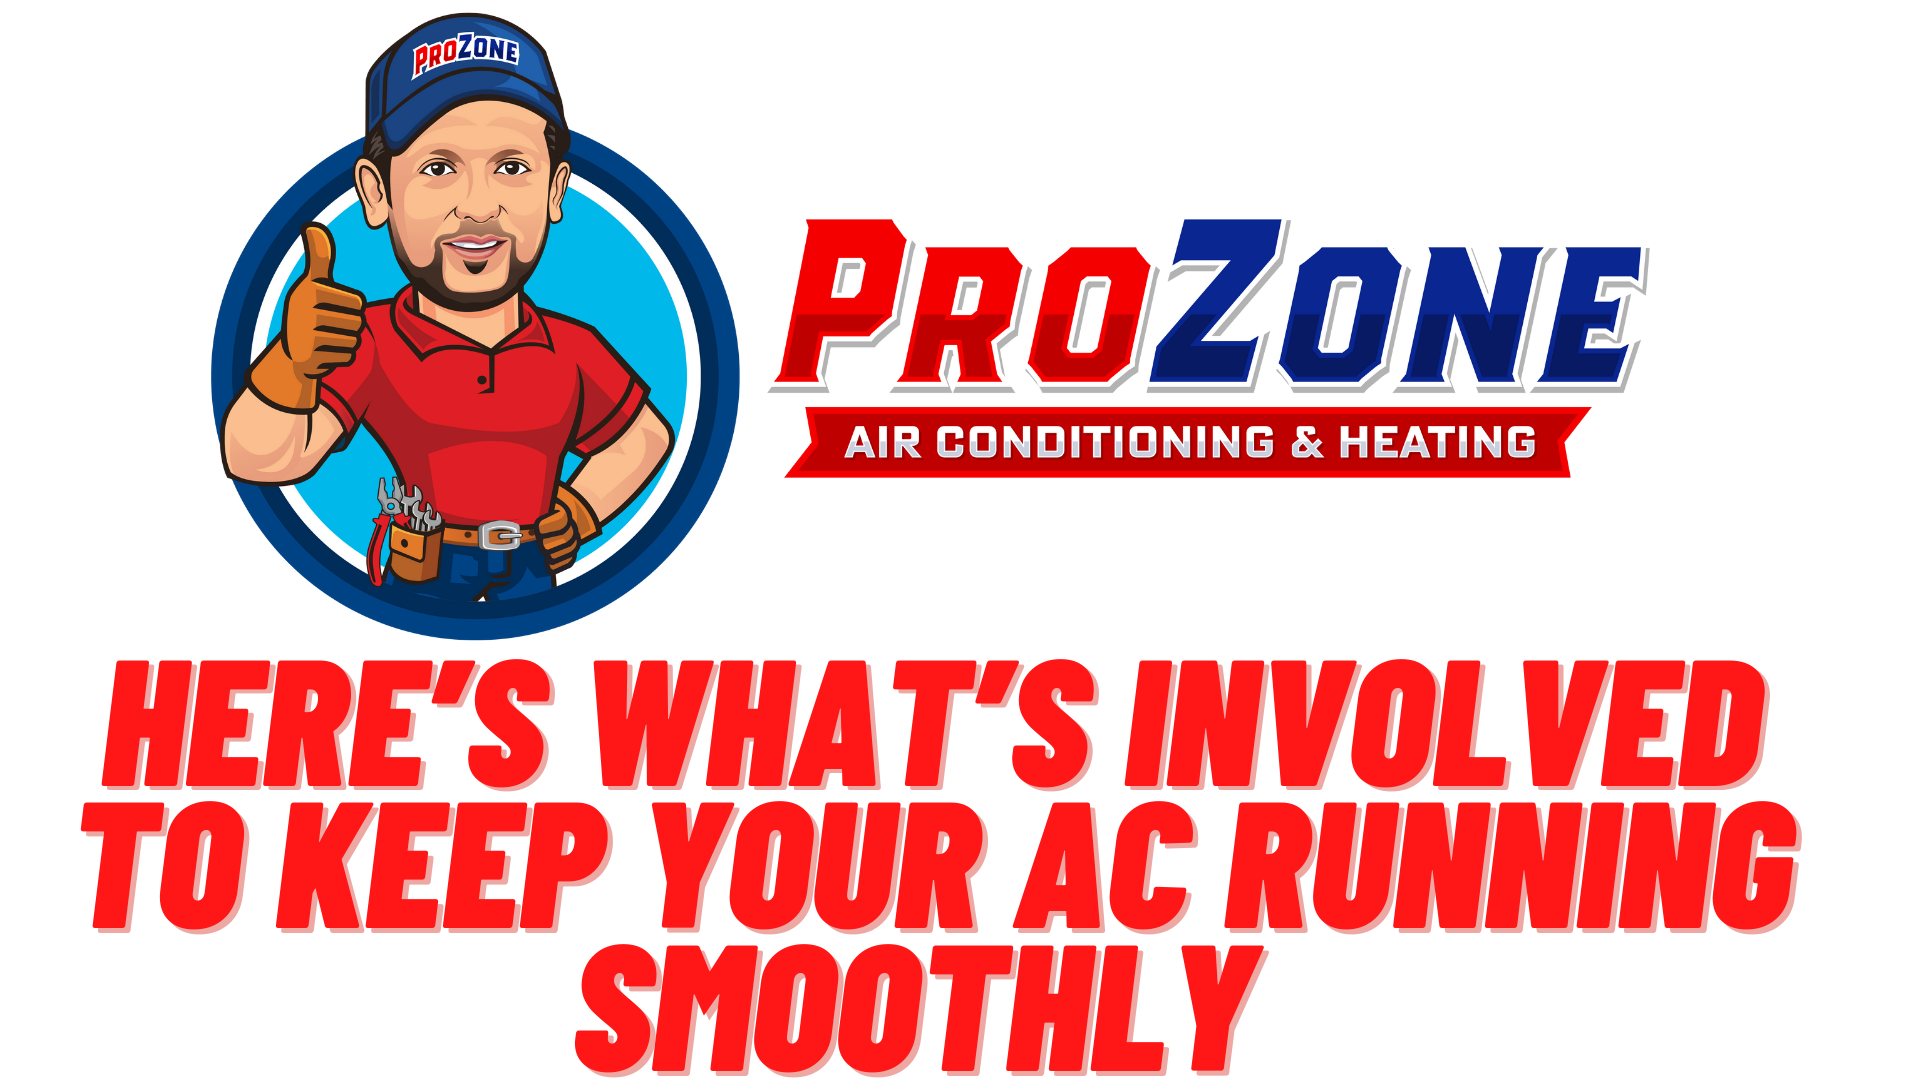 Air Conditioning Service Las Vegas: Here’s What’s Involved to Keep Your AC Running Smoothly